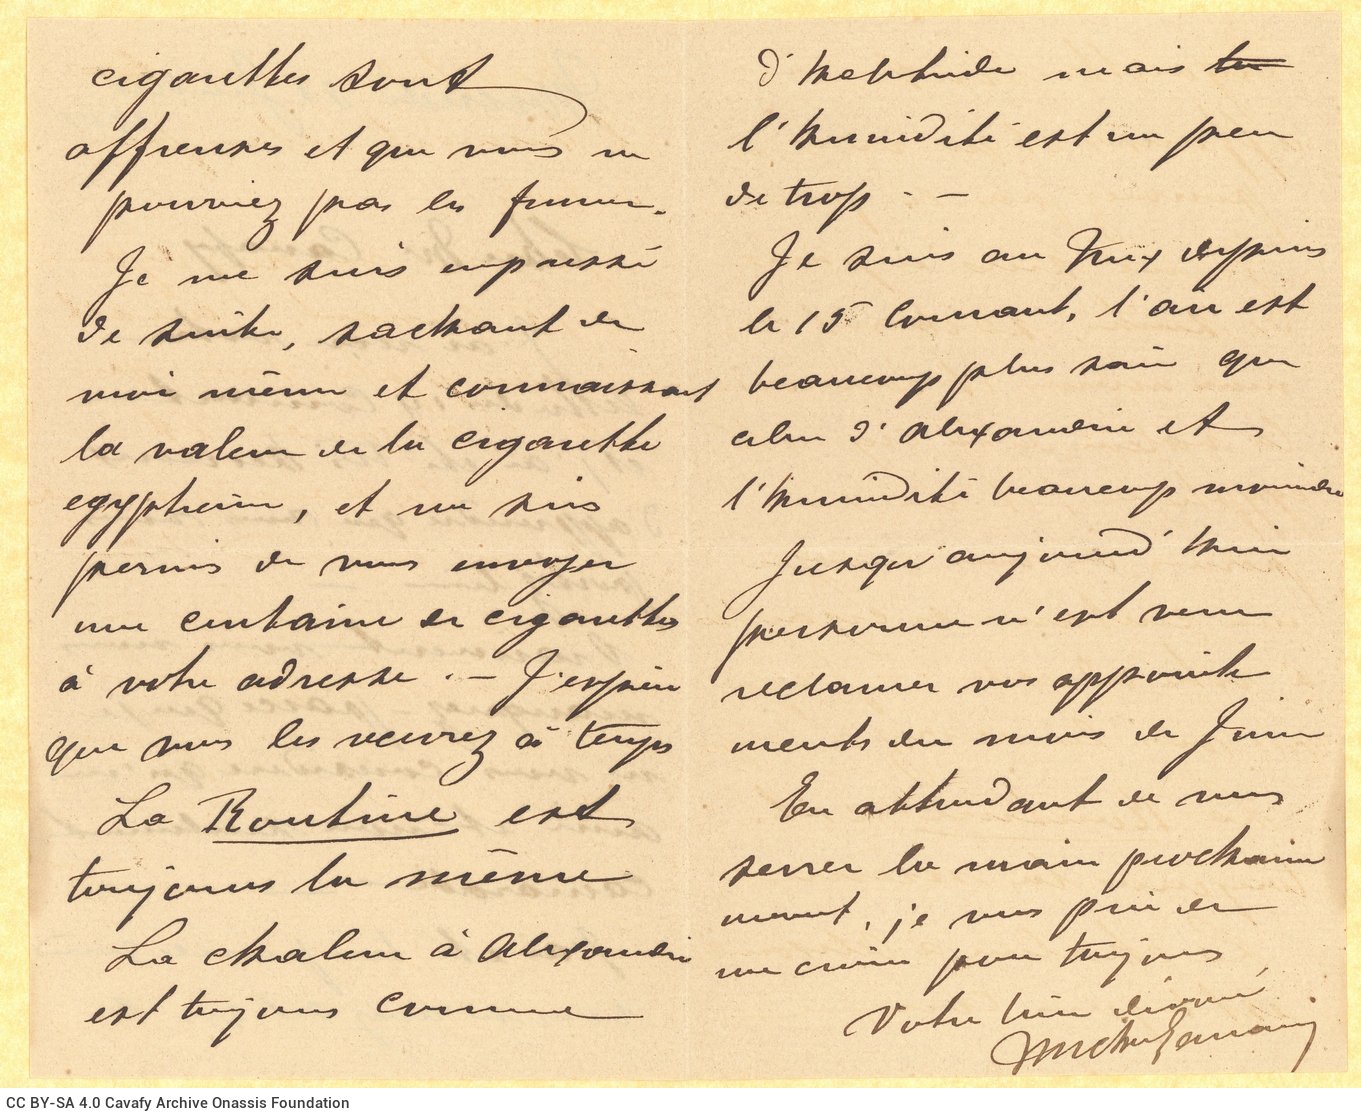 Handwritten letter by an unidentified author ("Michel") to Cavafy, on the first three pages of a bifolio. The last page is bl